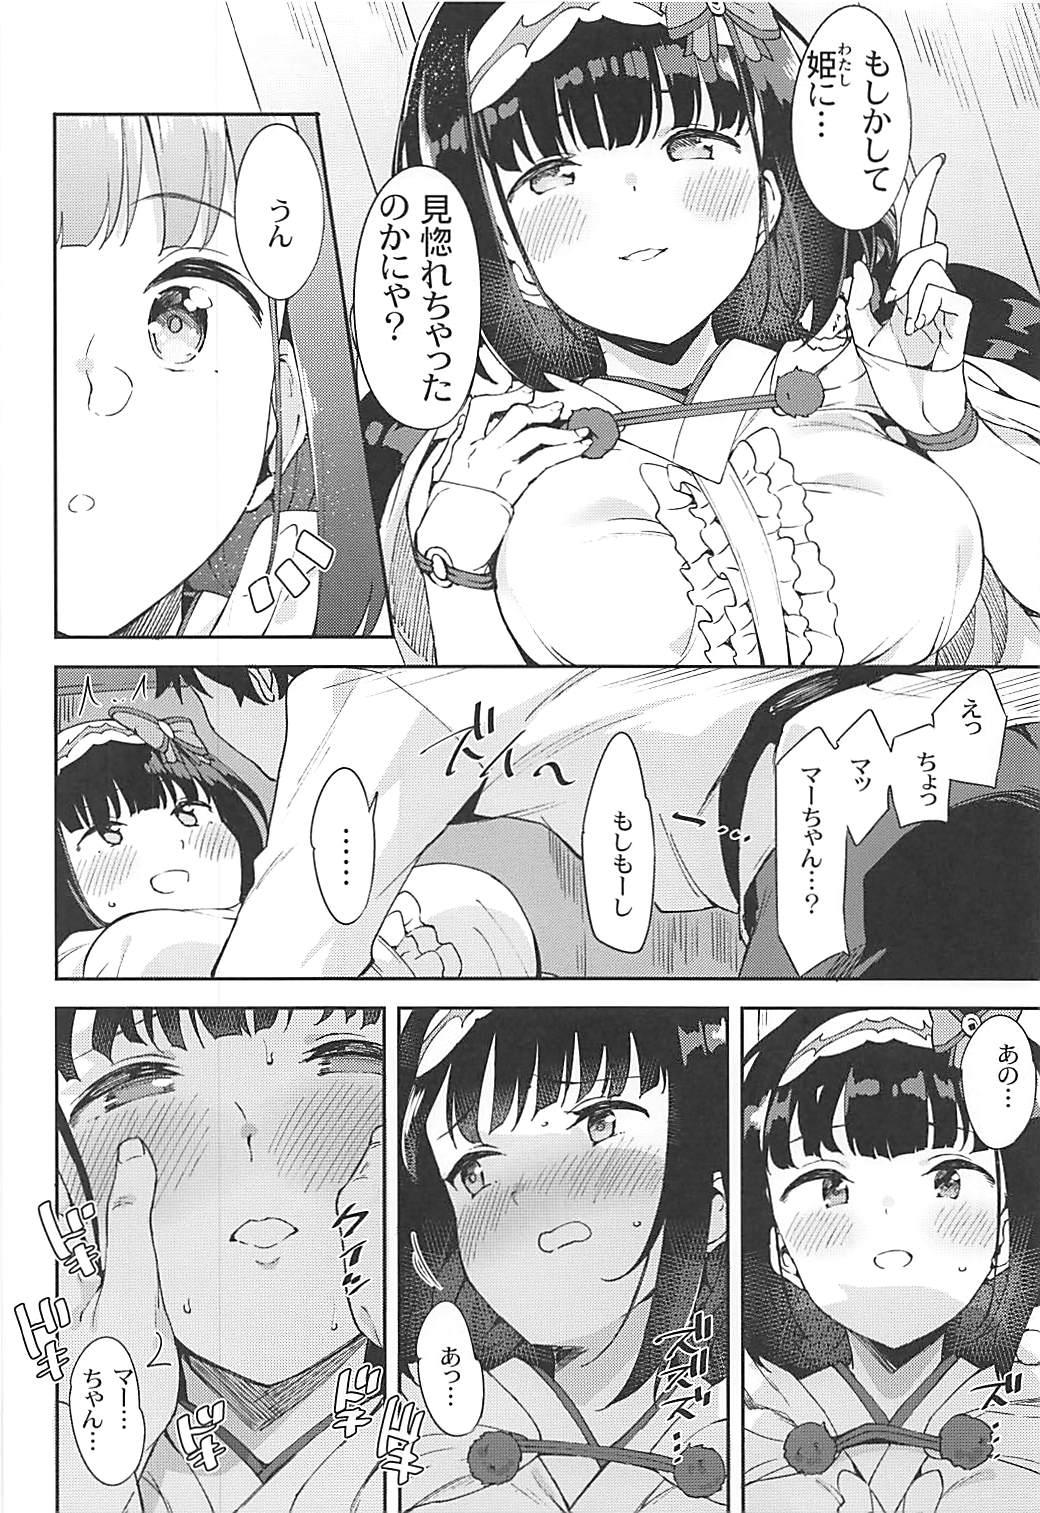 Best Blowjob Ever Osakabehime to Himegoto - Fate grand order Amateur Porn - Page 7